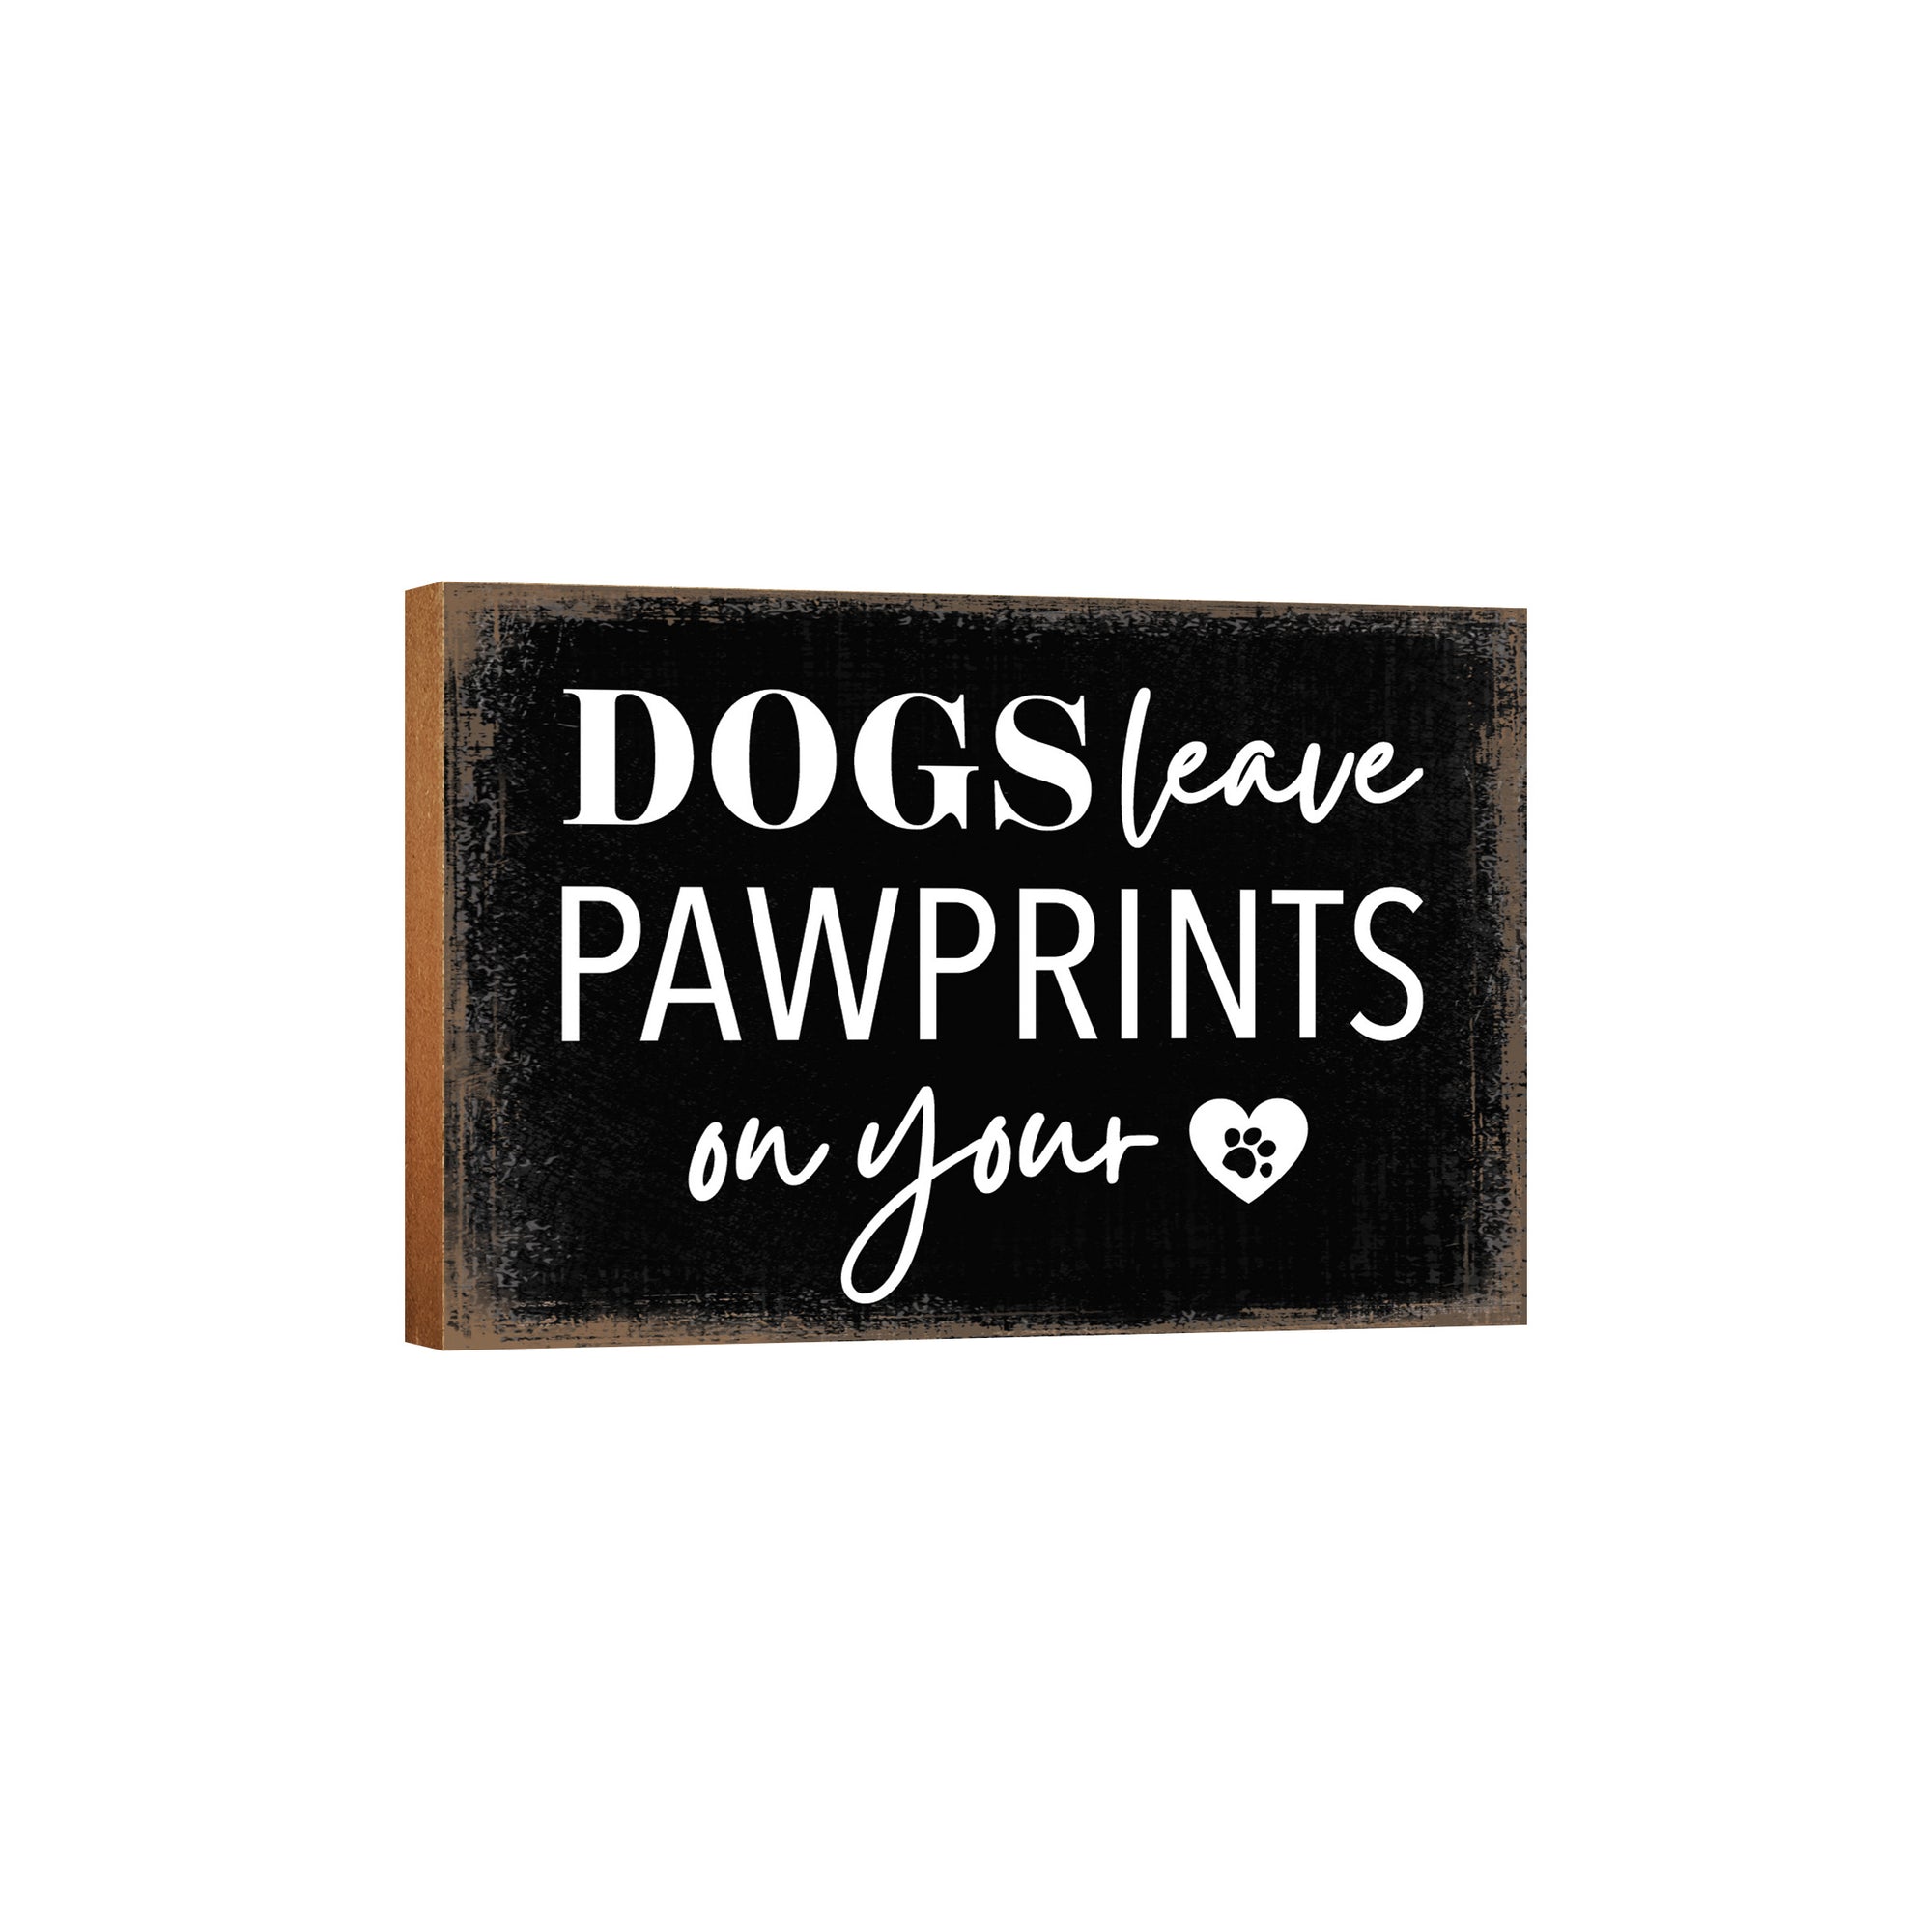 Wooden Shelf Decor and Tabletop Signs with Pet Verses - On Your Heart